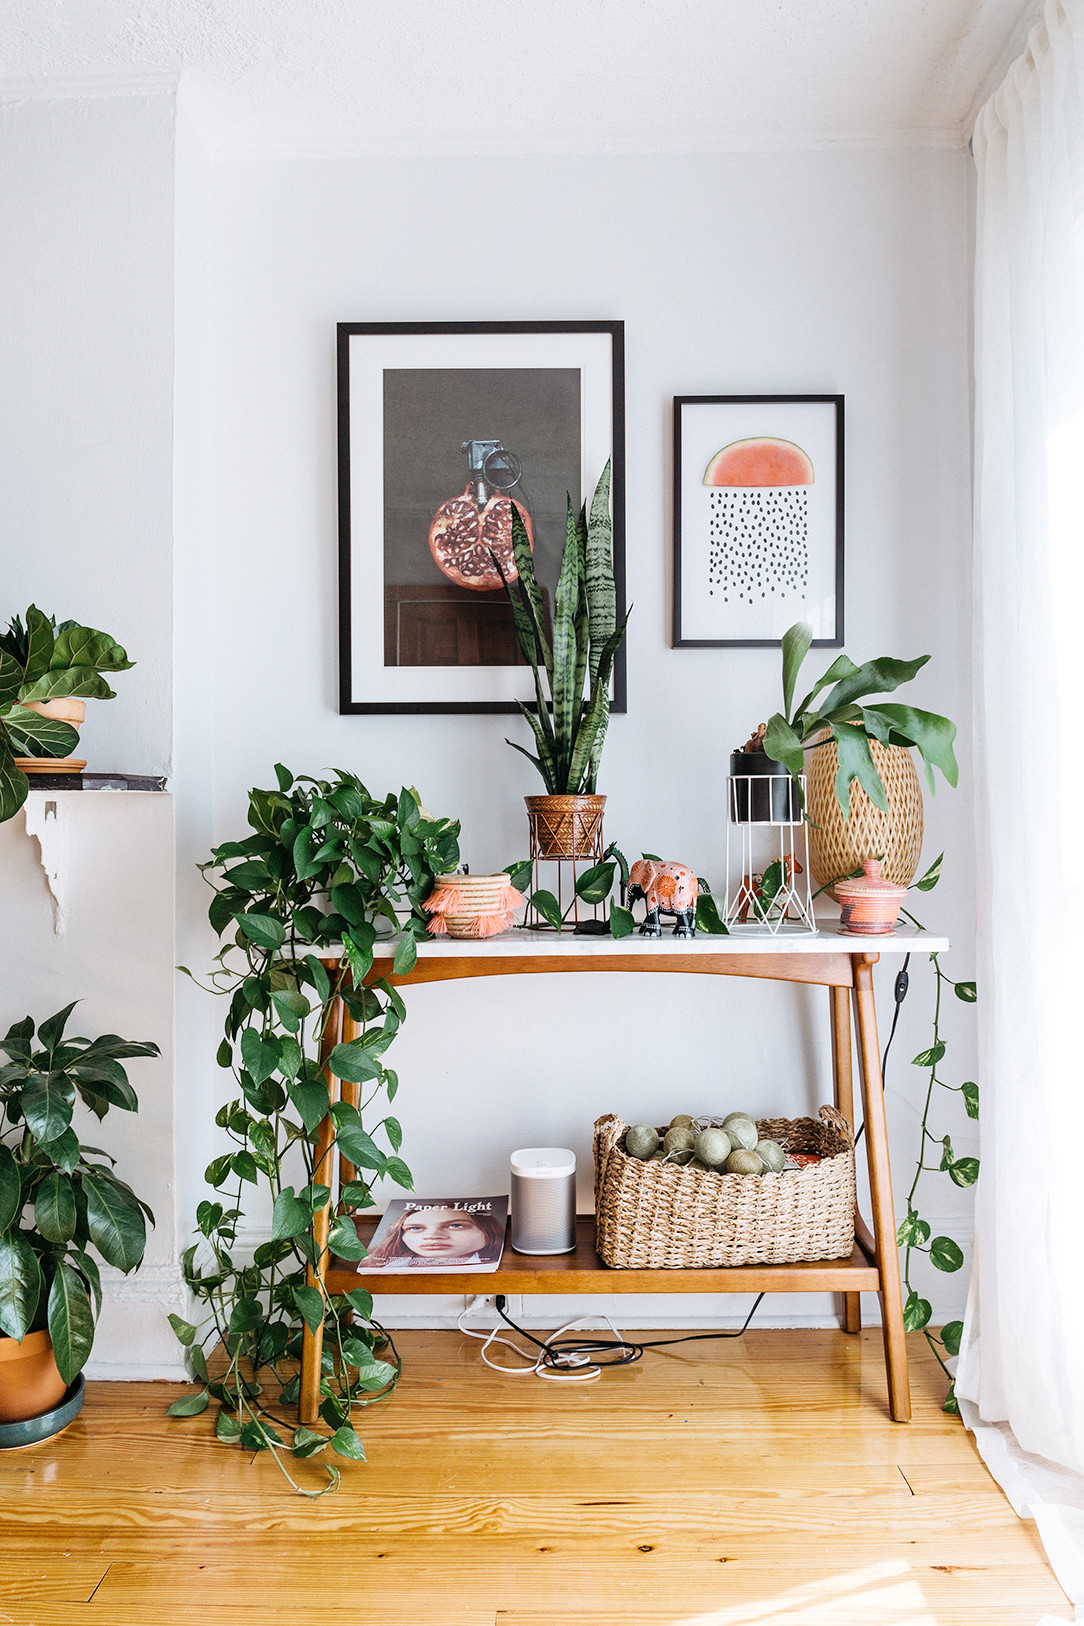 Bring Climbing Vines Indoor And Make Your Home Look Like A Green Jungle